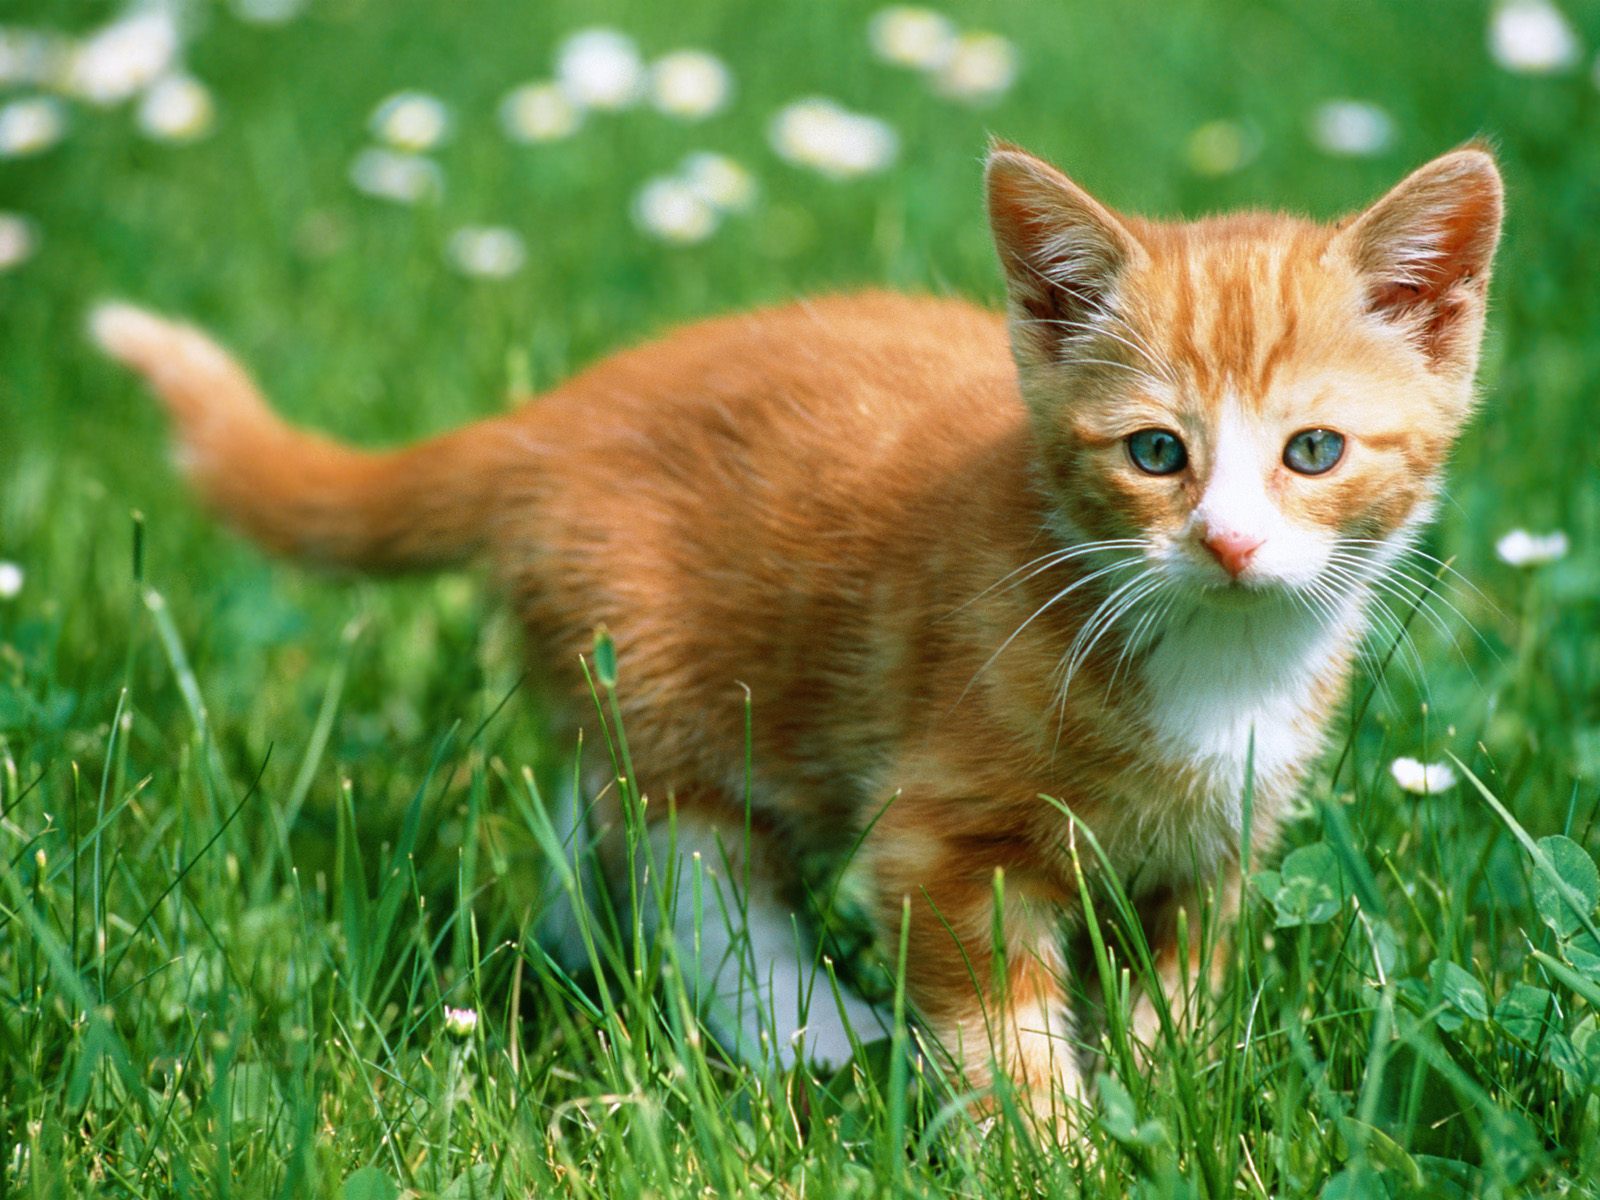  HD  Cat  Wallpaper Pictures  Of Cats  Animal Photo